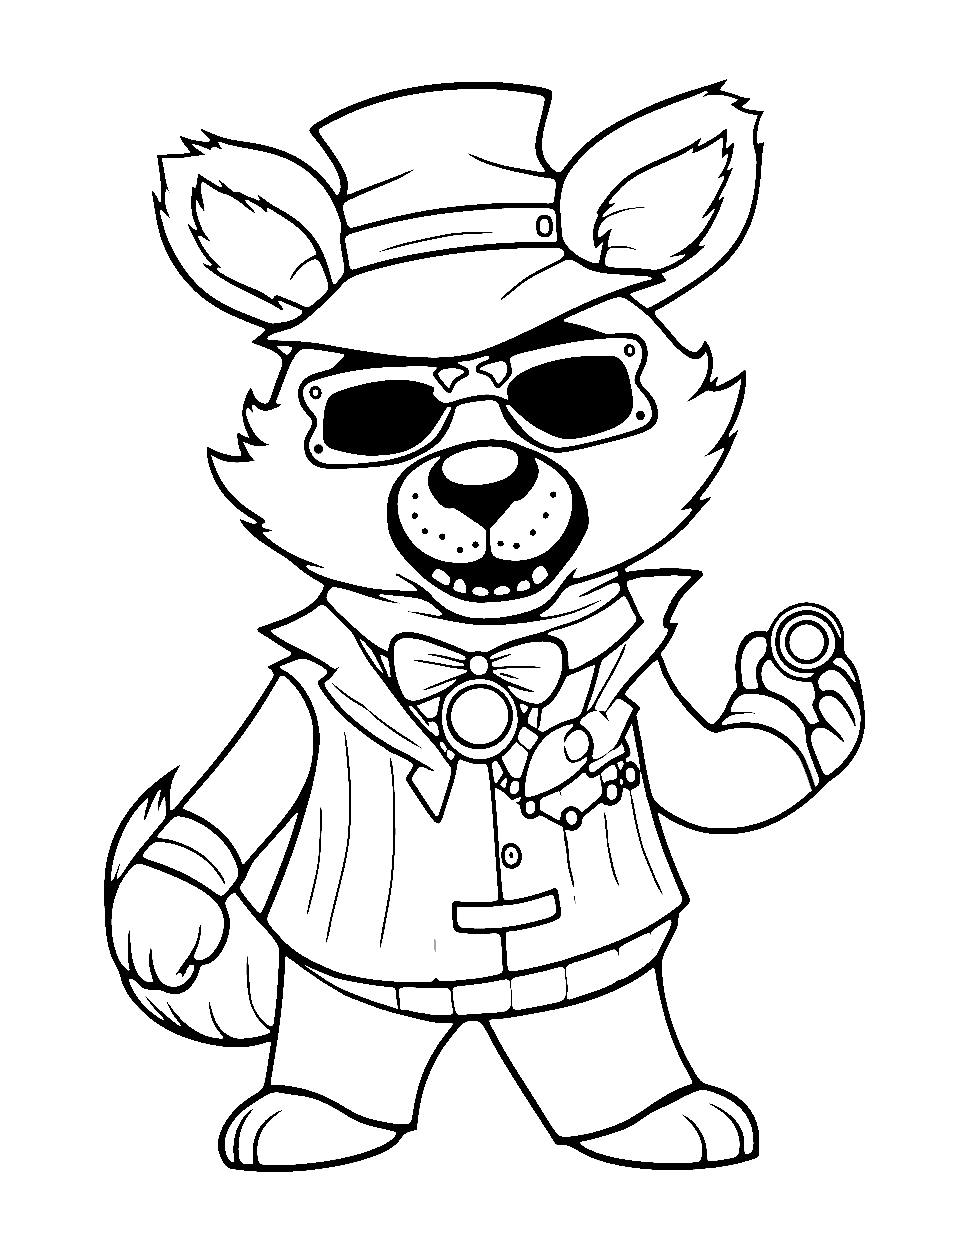 Cool Foxy Coloring Page - Foxy wearing sunglasses and a hat.